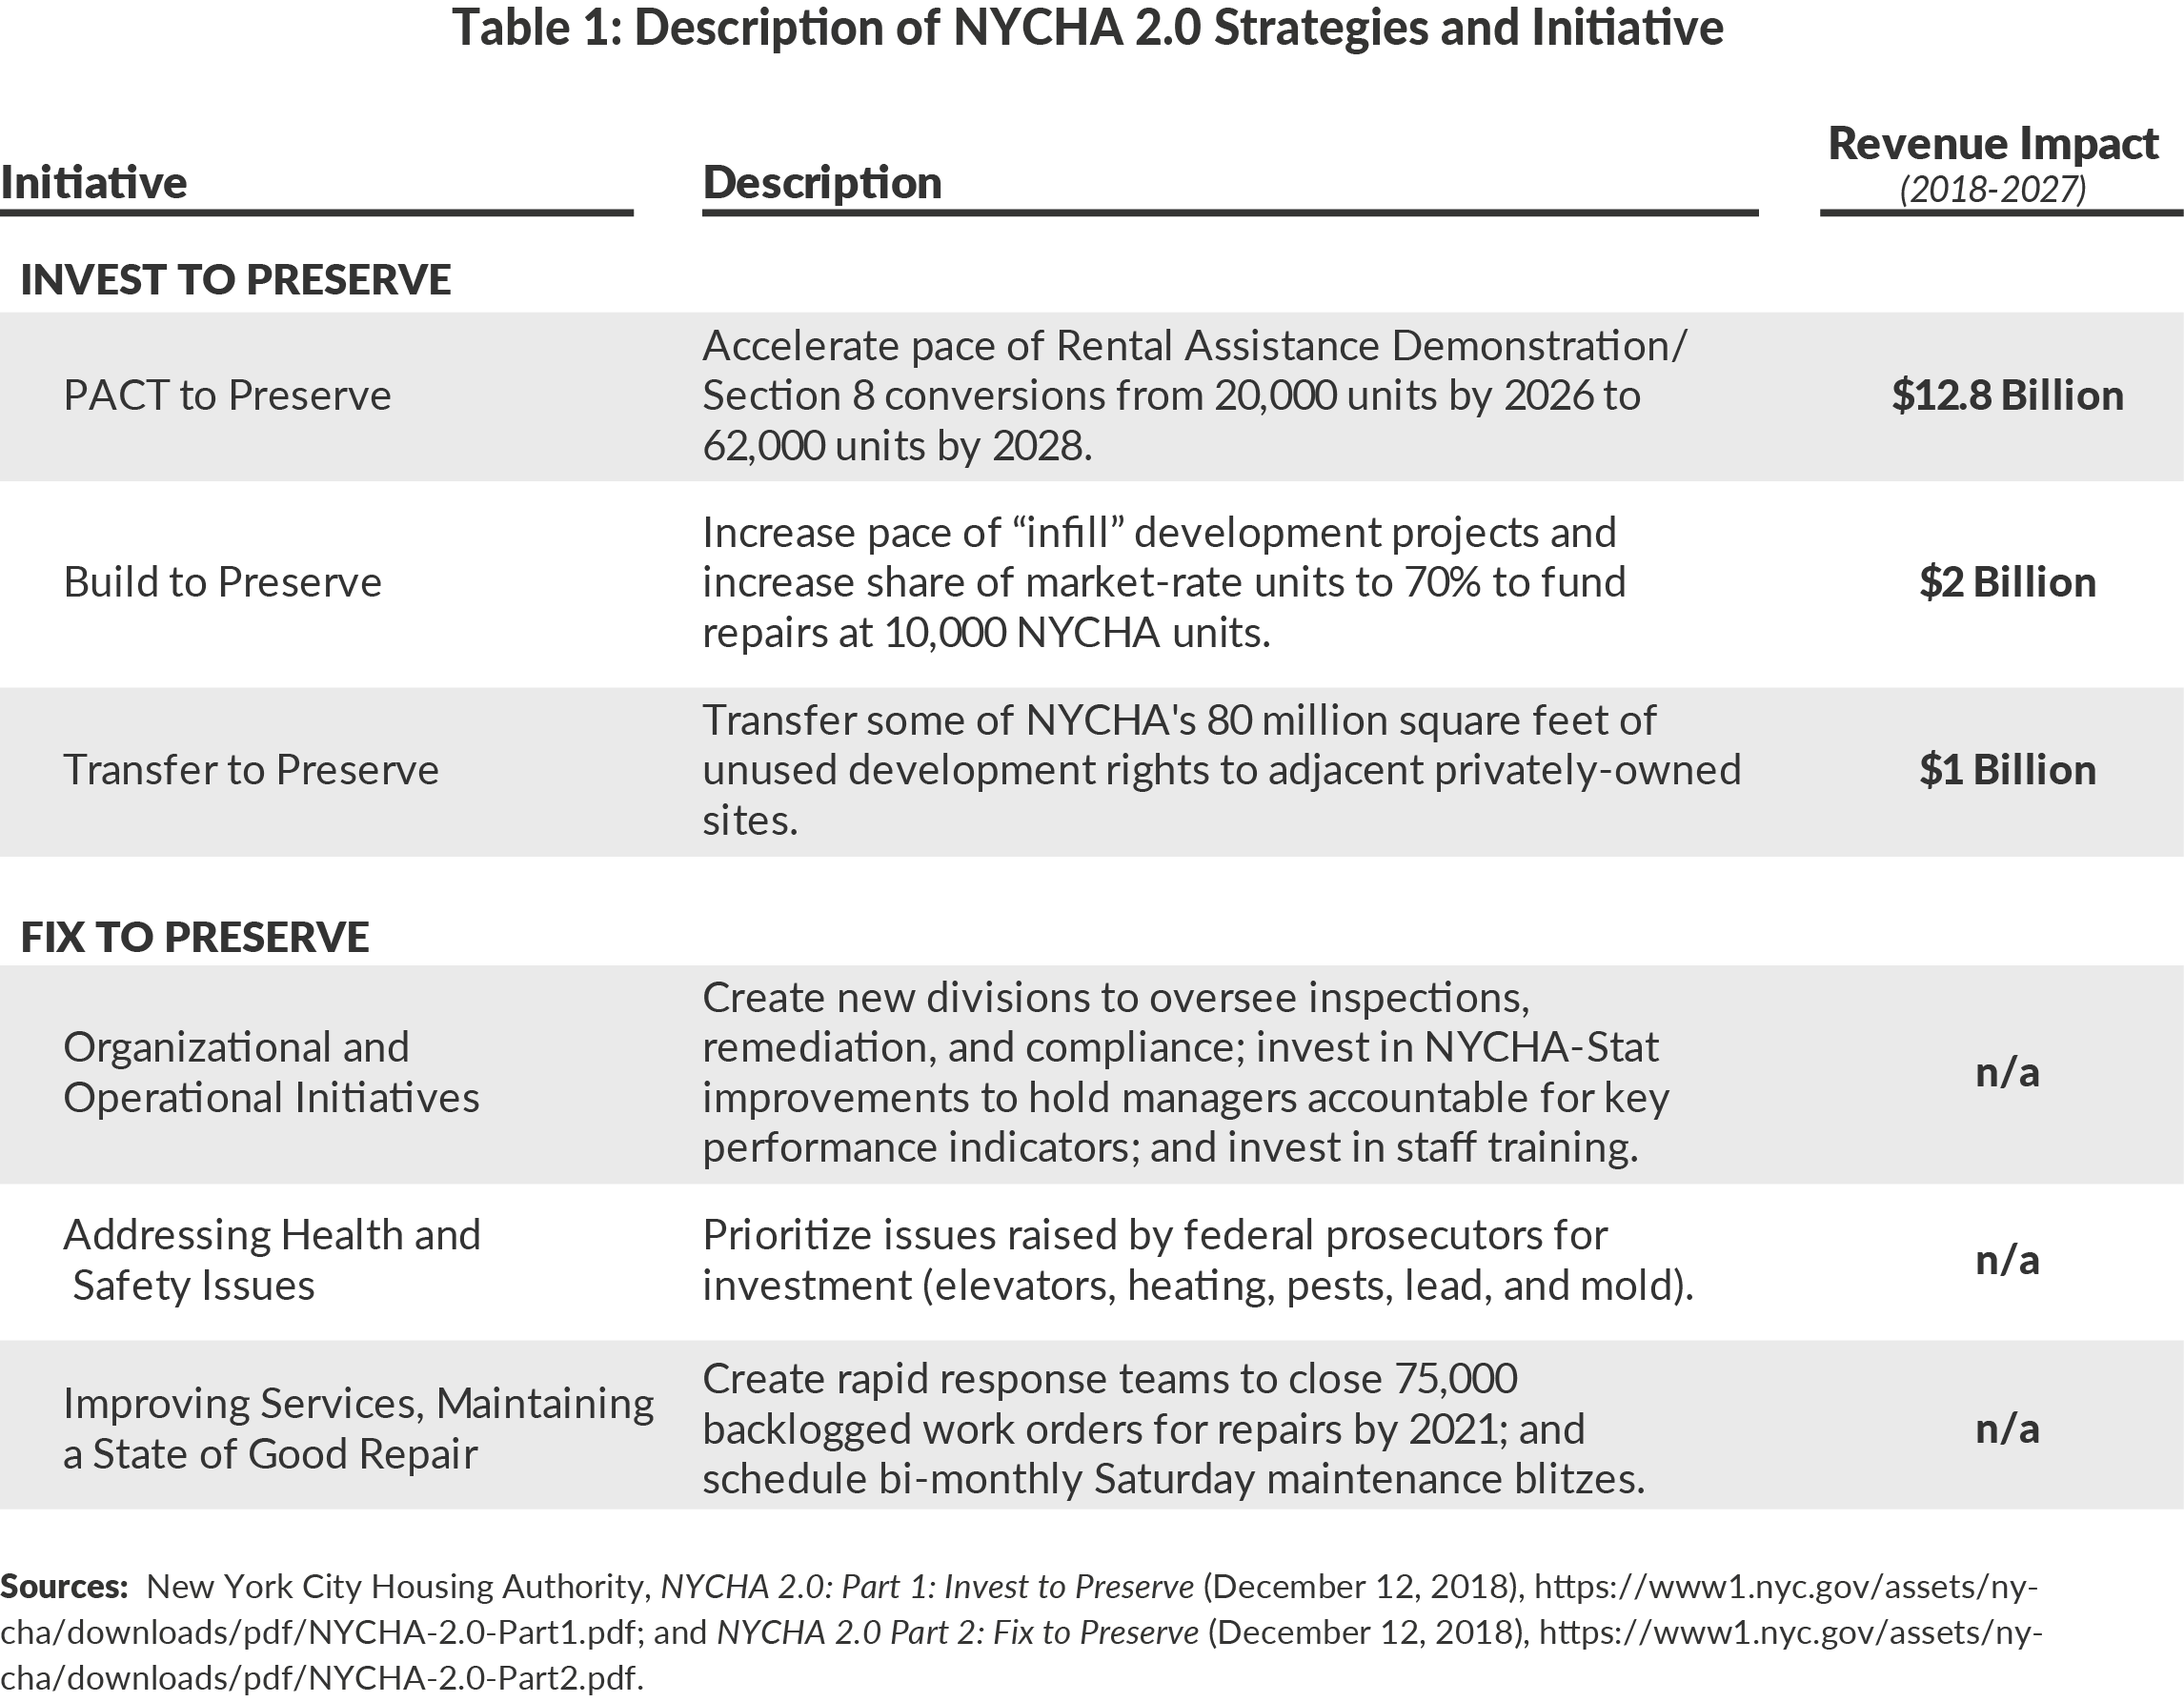 Table 1: Description of NYCHA 2.0 Strategies and Initiative